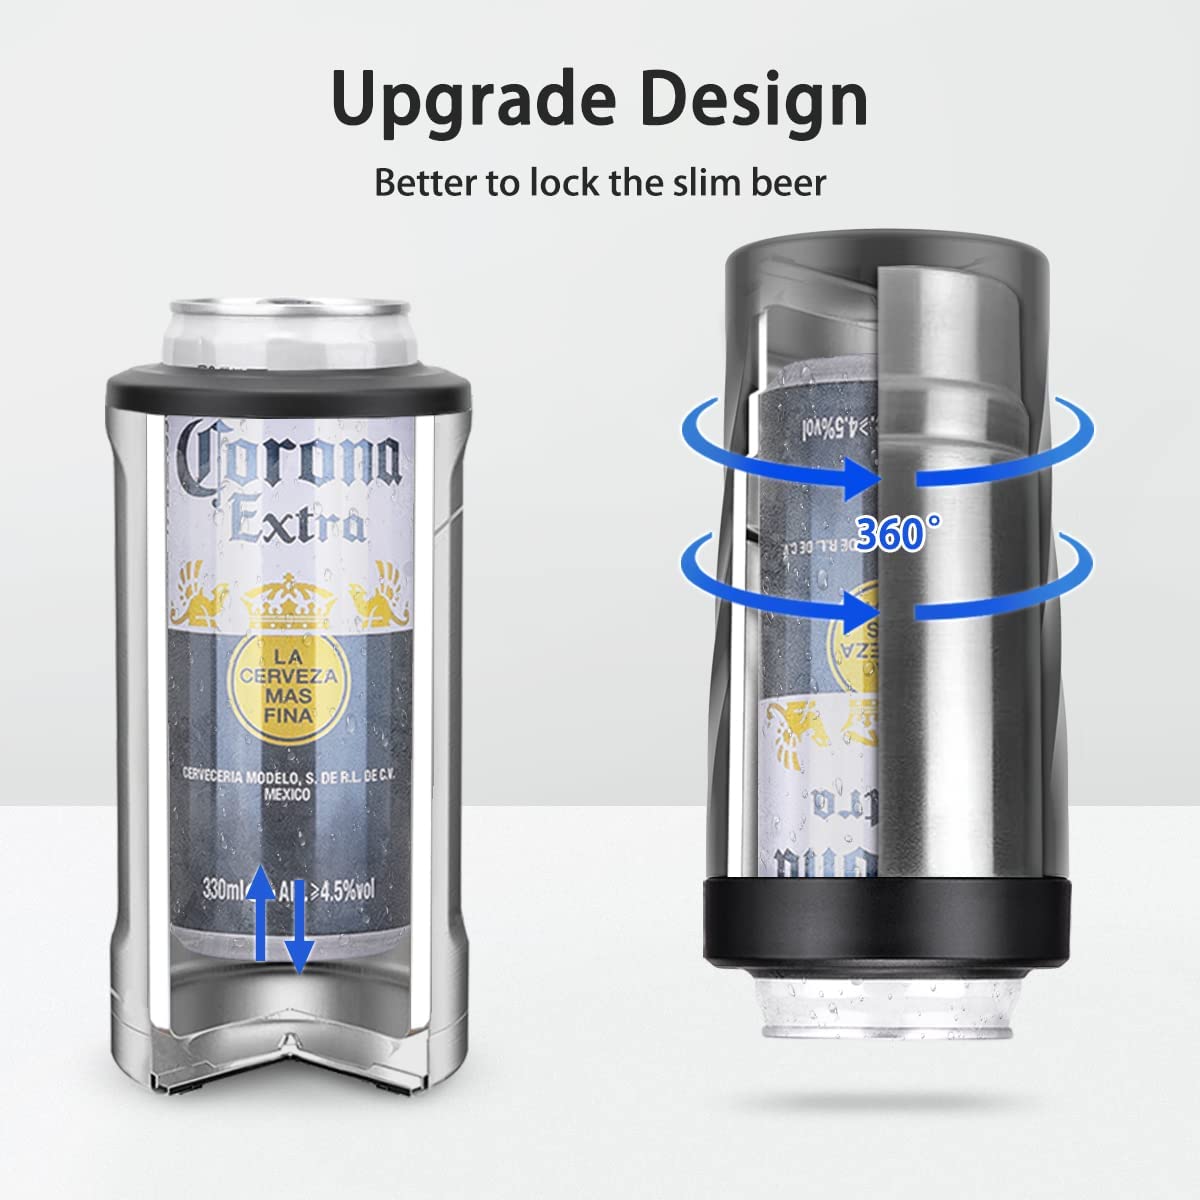 4 in 1 Slim beer can cooler for all 12 OZ Cans- Double Walled Stainless Steel Can Insulator Keep 8 Hours Cold- Thread Design Easy to Hold-Upgrade Insulated Can Cooler Fits Most Car Cup Holders